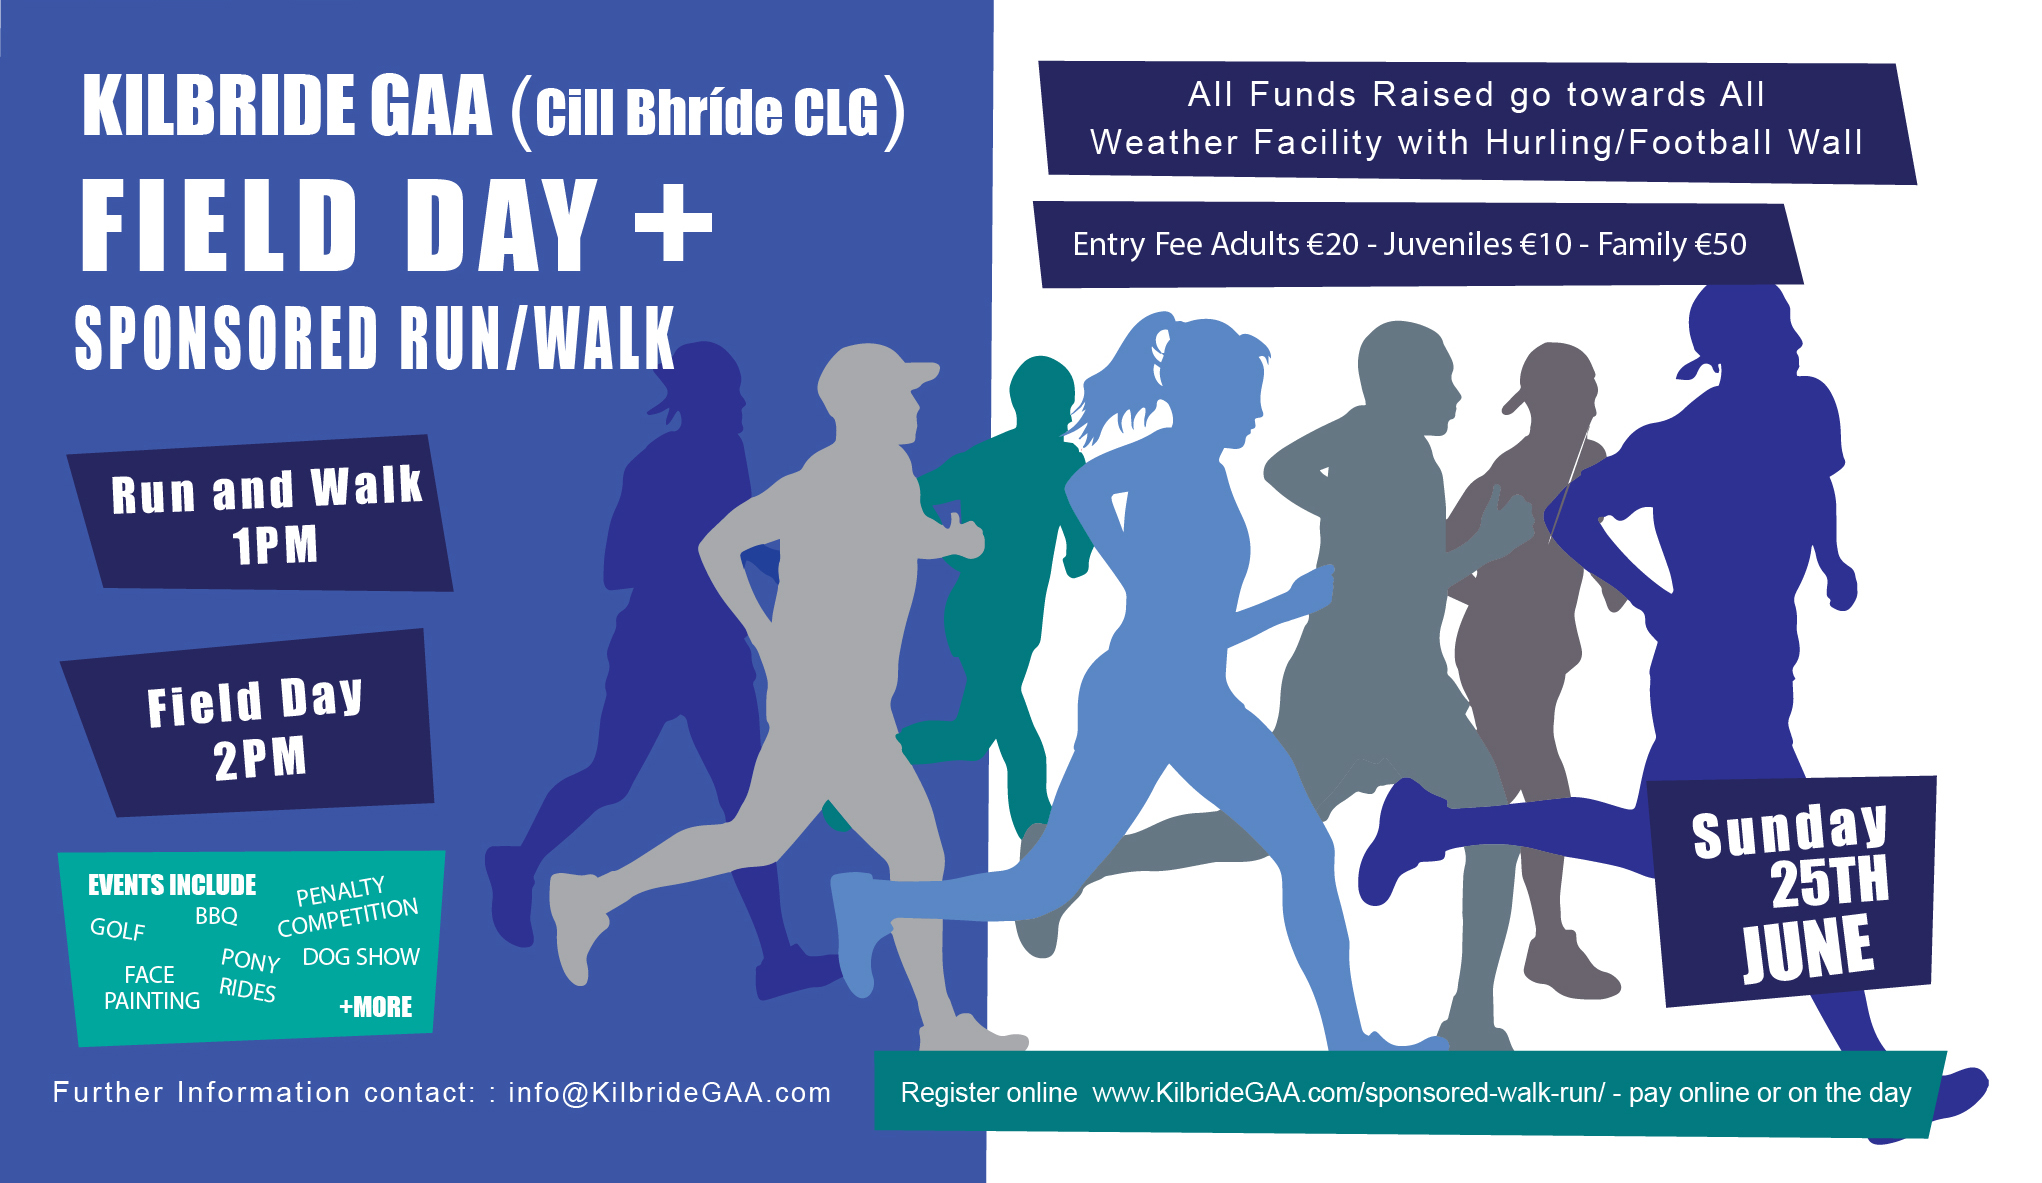 The Manor Kilbride Field Day (2PM) & Sponsored Run/Walk (1PM) – Sunday the 20th of AUGUST